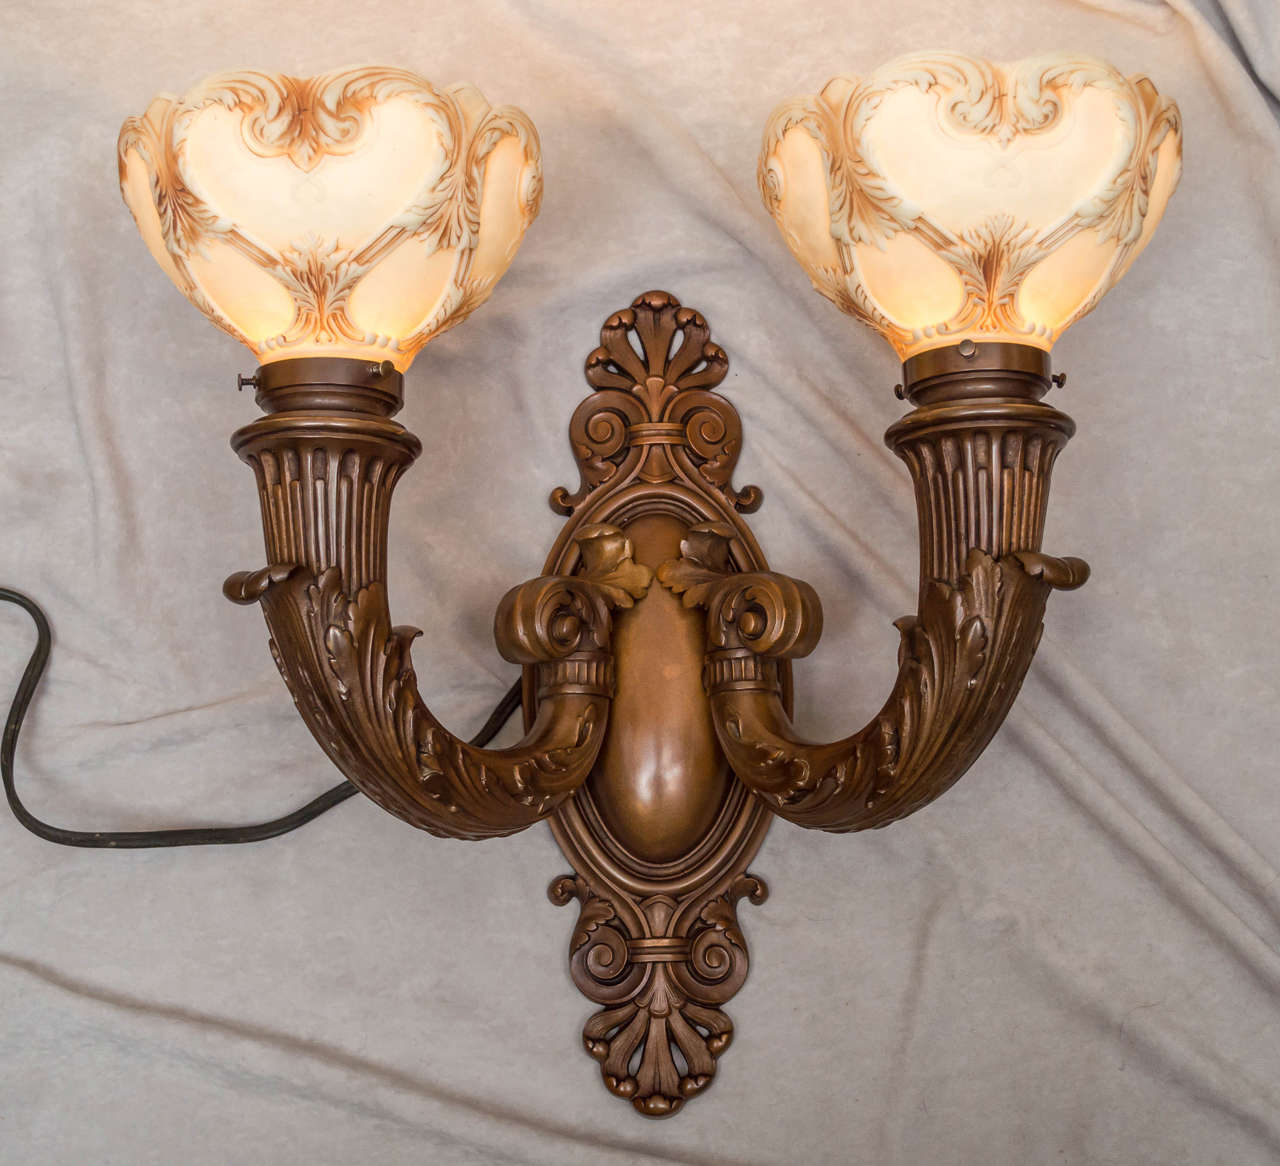 This massive and handsome pair of sconces represent the best of what a good foundry can produce. They are signed 